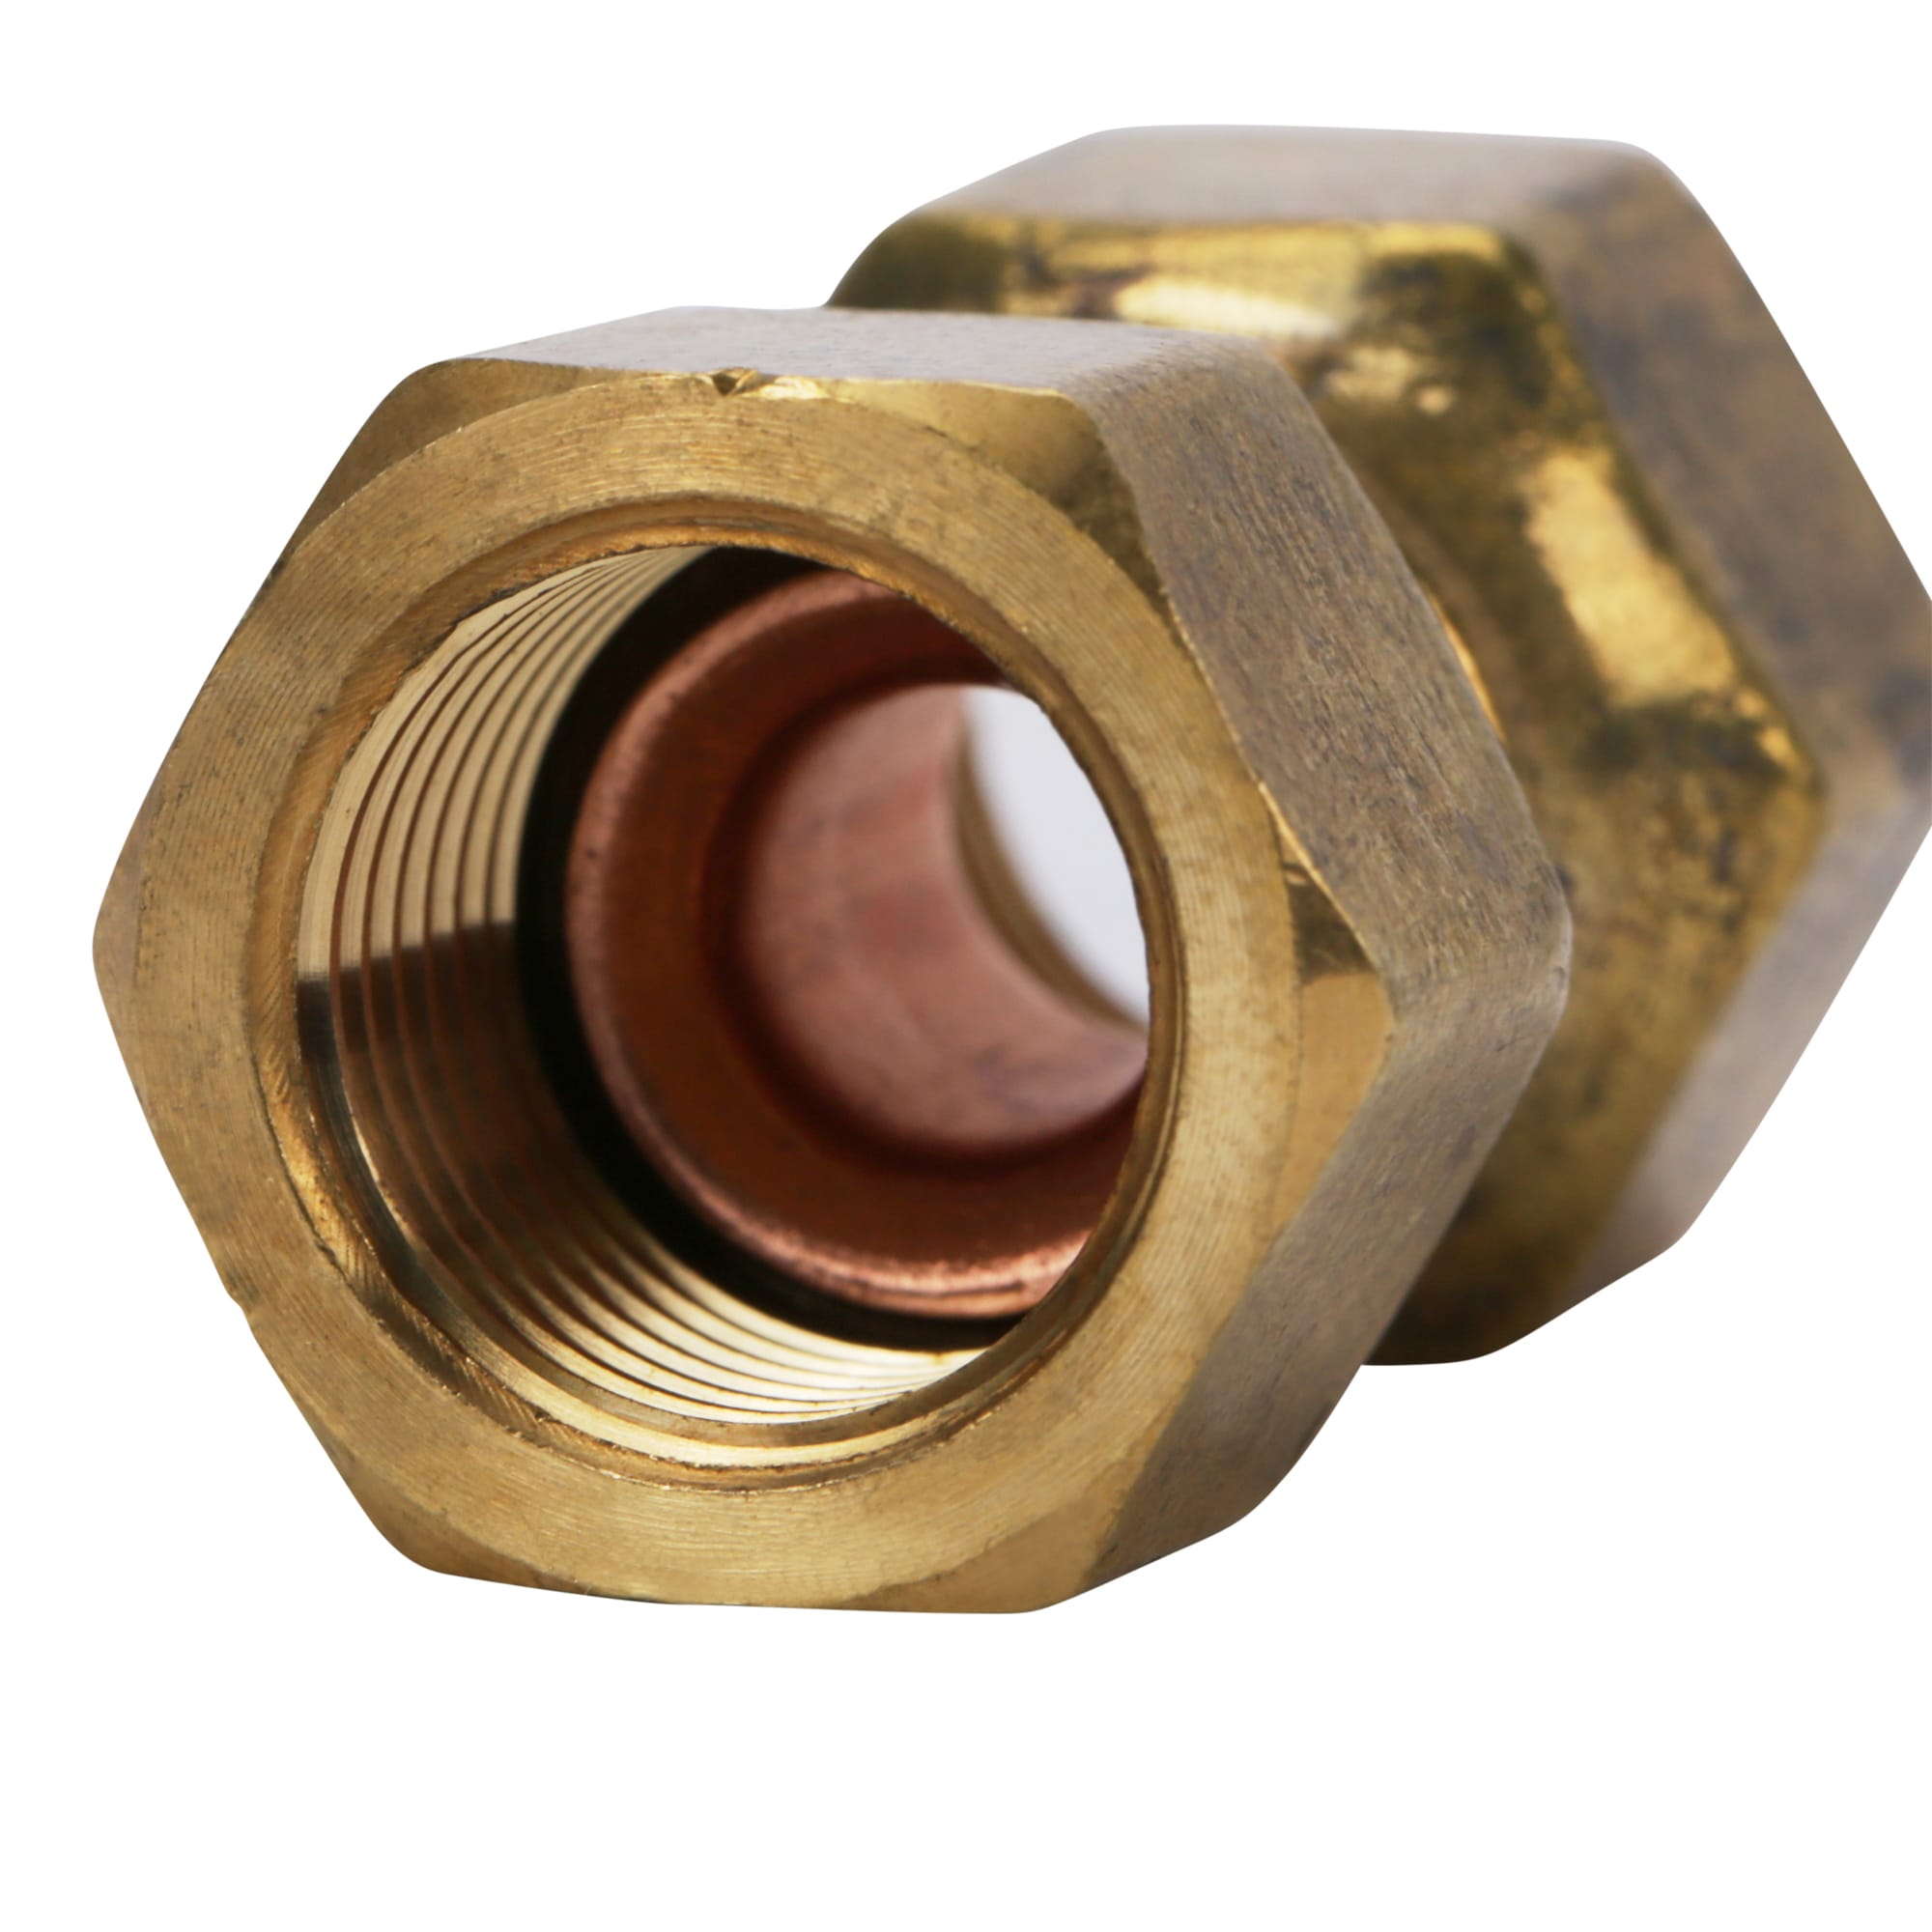 Proline Series 3/4-in x 1/2-in Threaded Female Adapter Fitting in